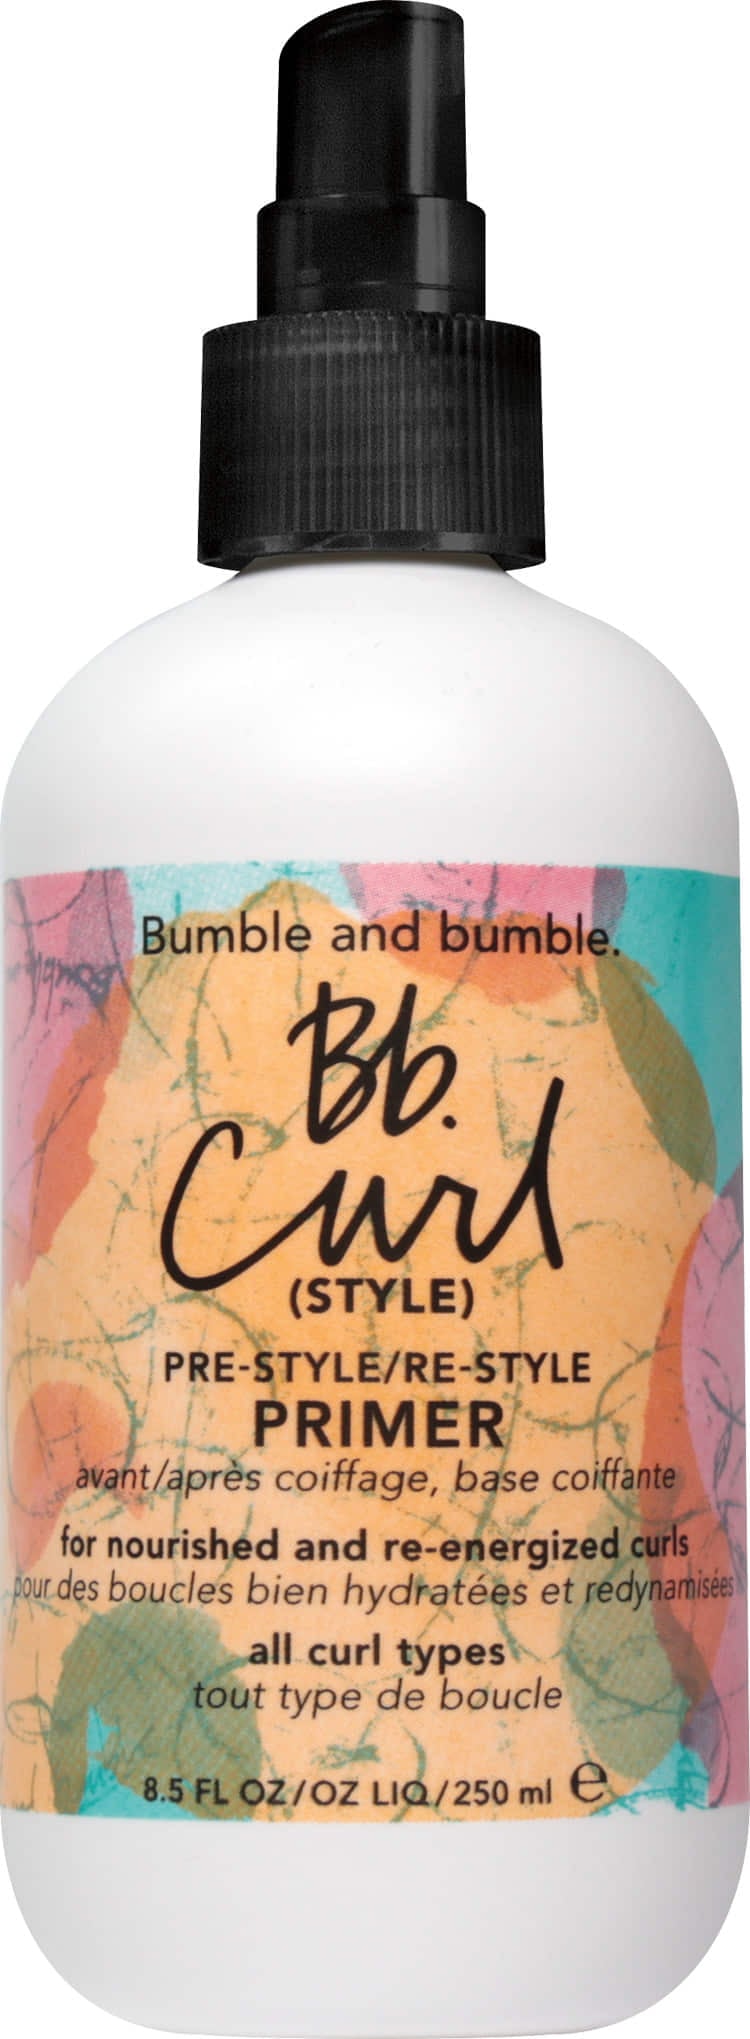 Bumble and Bumble Curl Pre-Style/Re-Style Primer